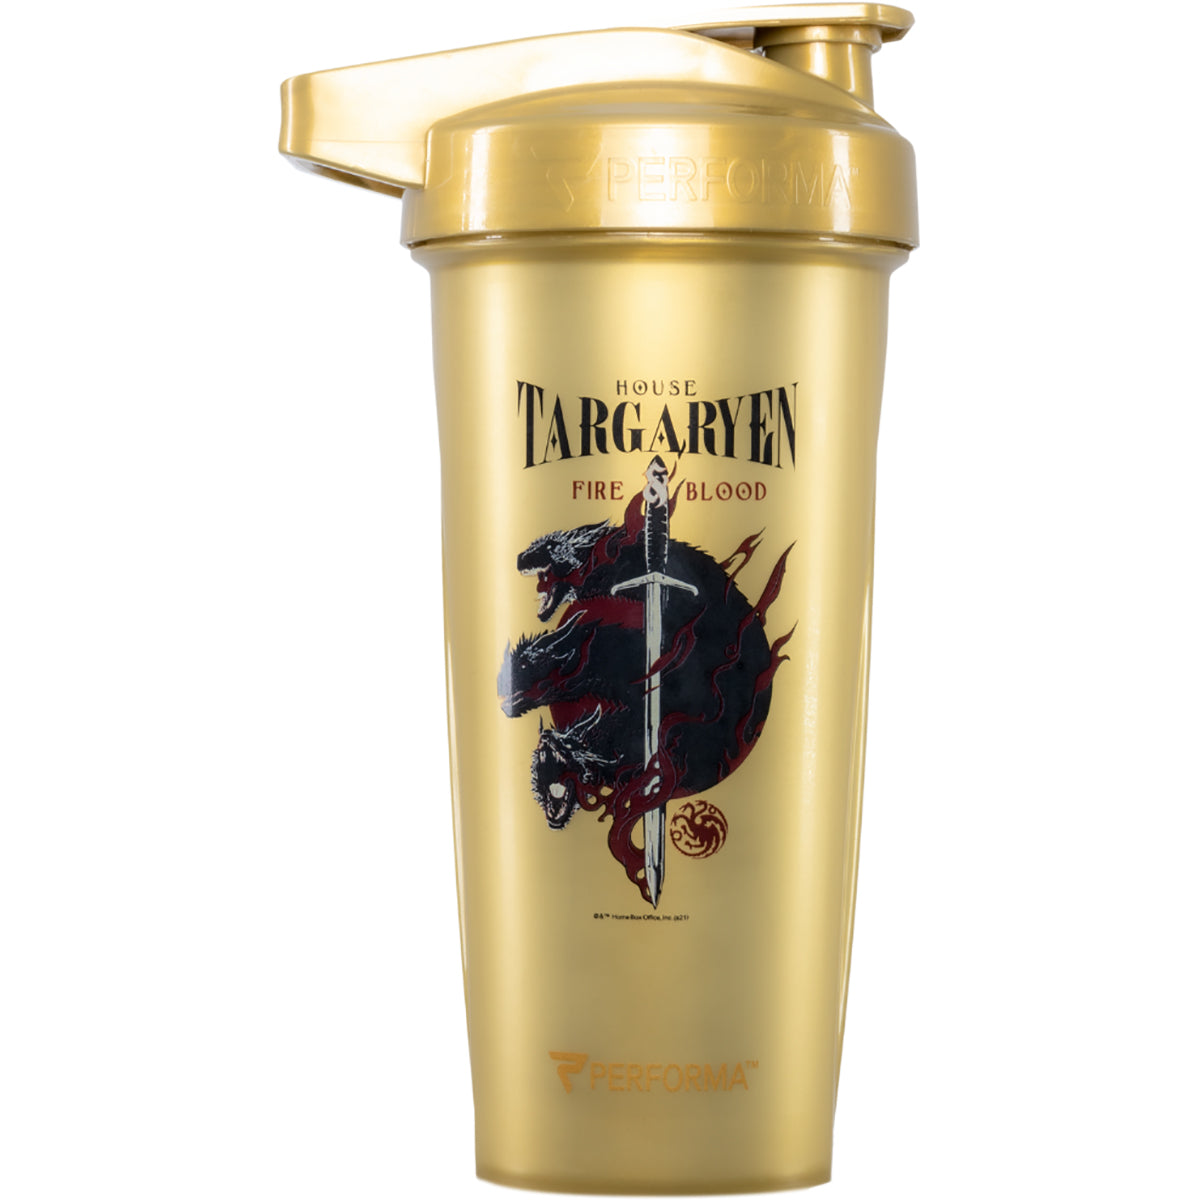 Performa Activ 28 oz. Game Of Thrones Collection Shaker Cup Performa